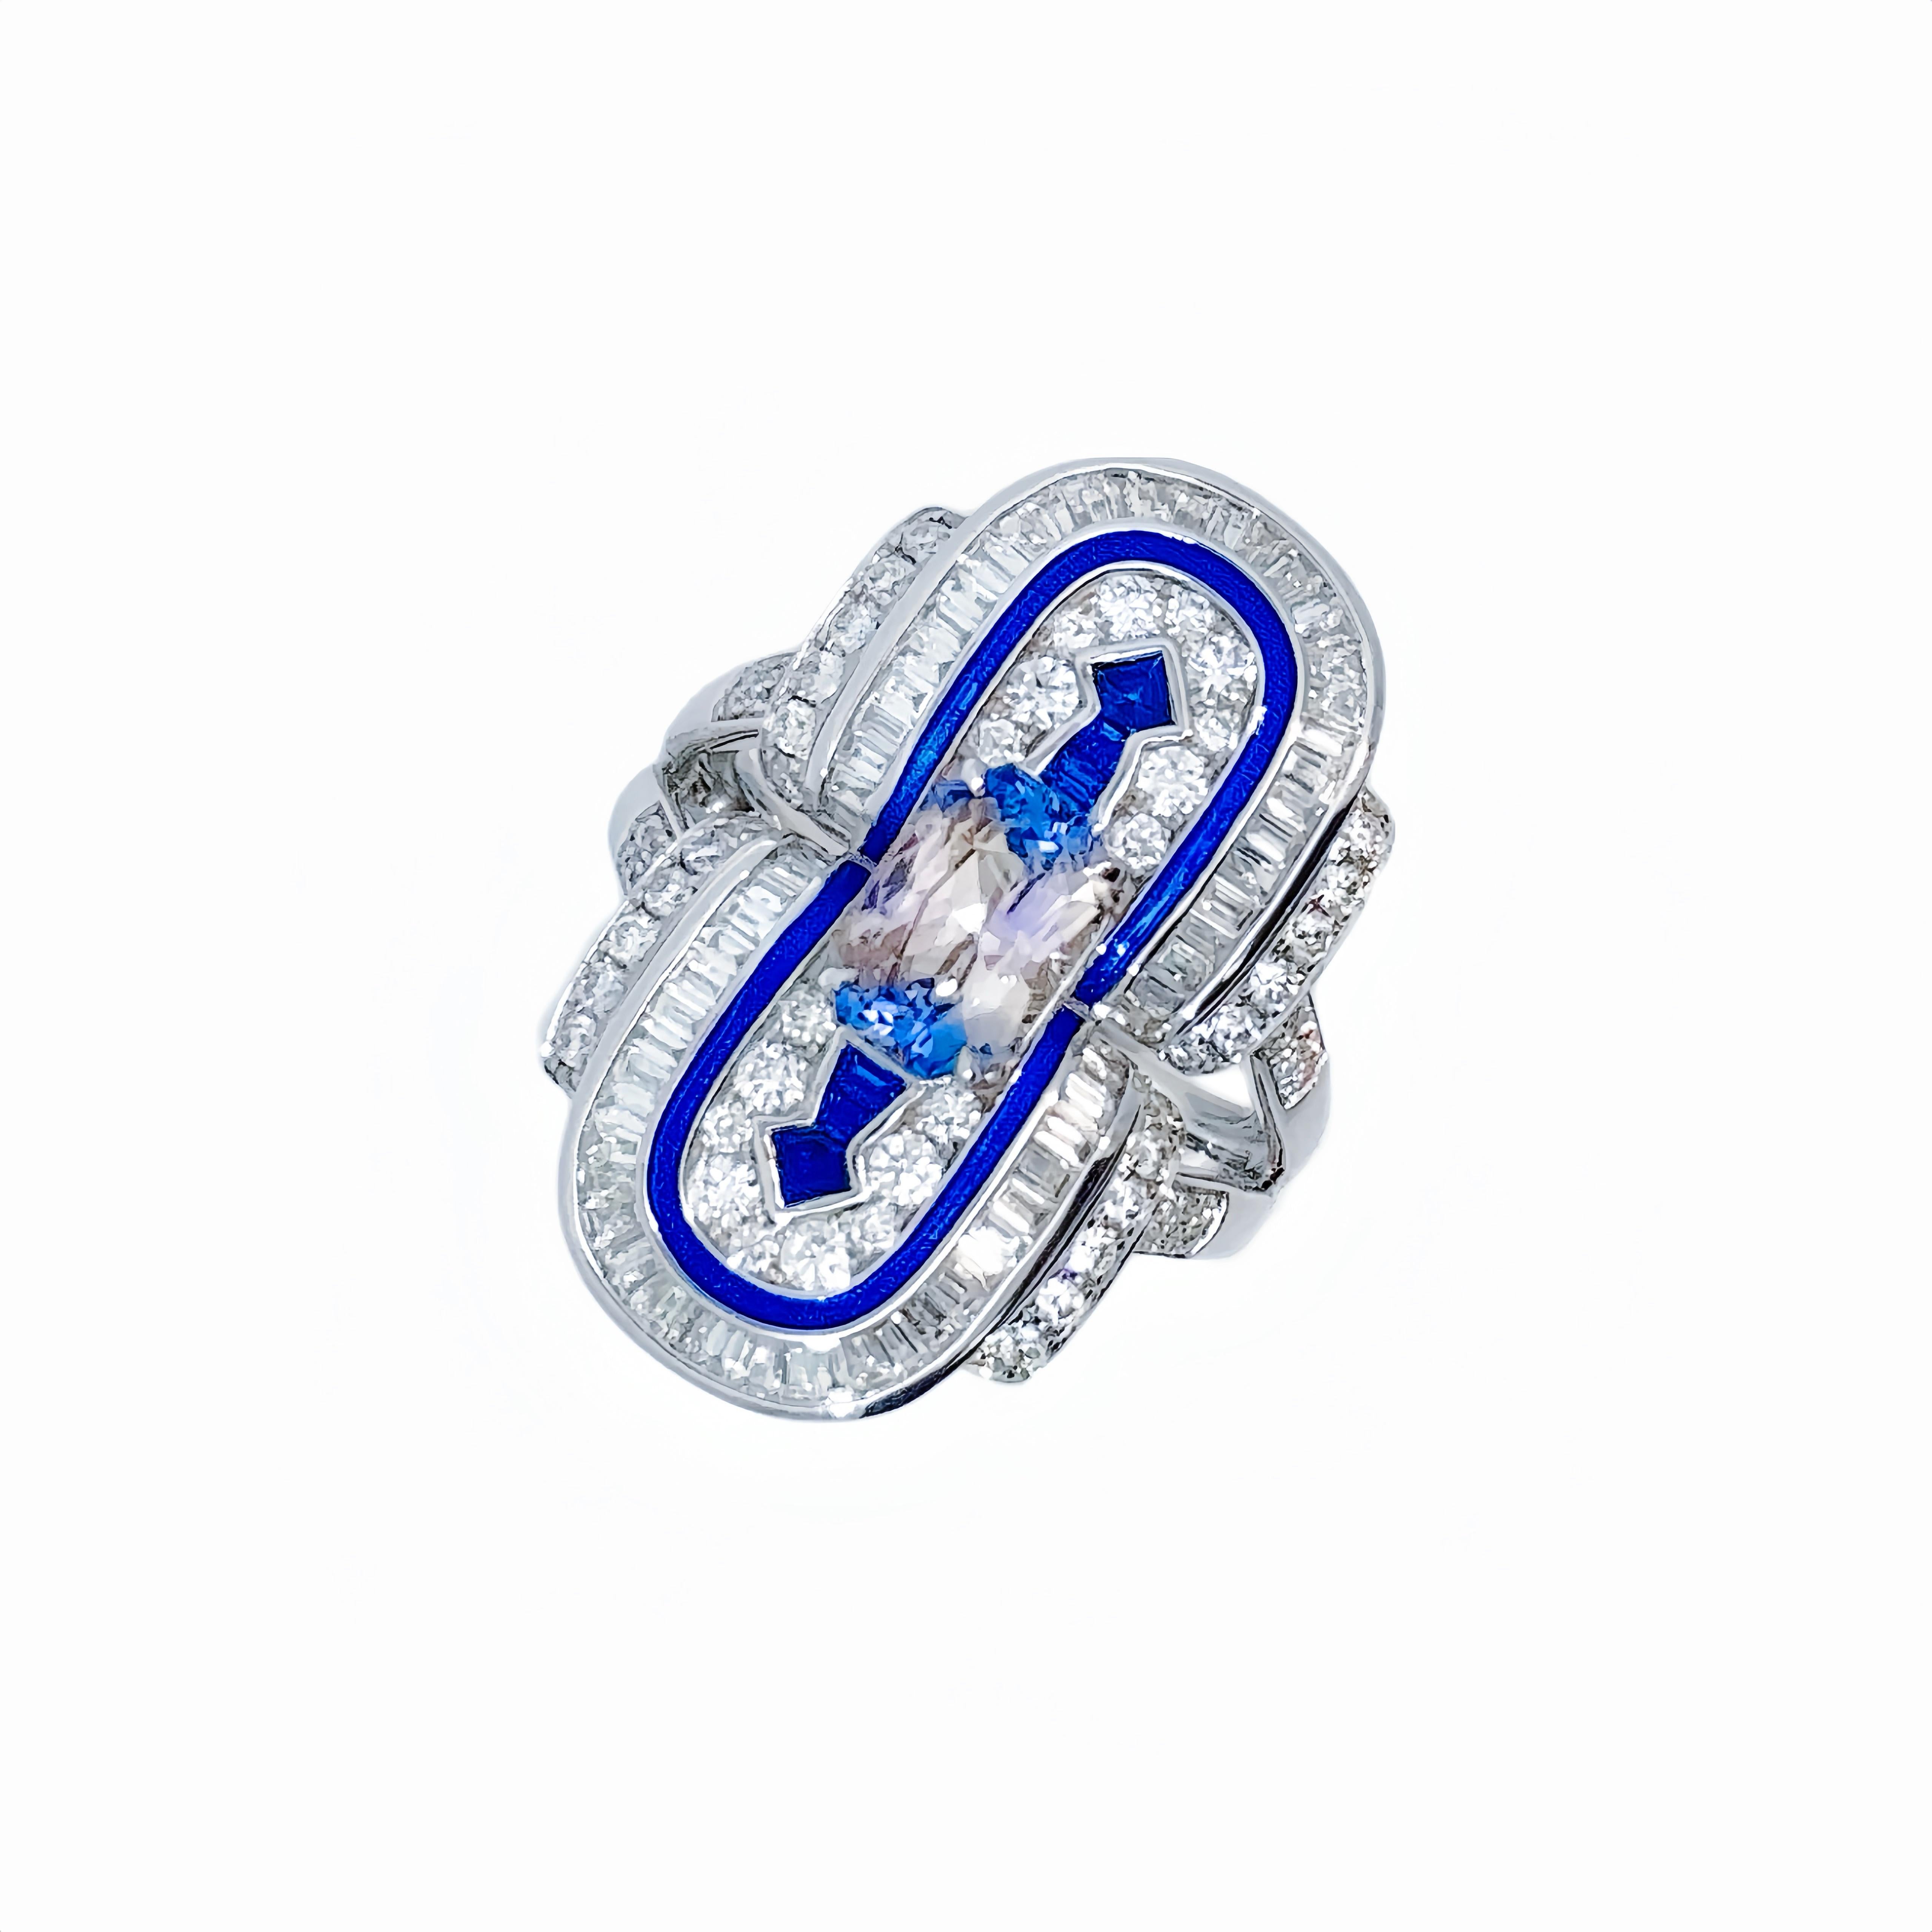 Boucheron inspired Art deco Sapphire Diamond Cocktail Ring, Made to Order For Sale 3